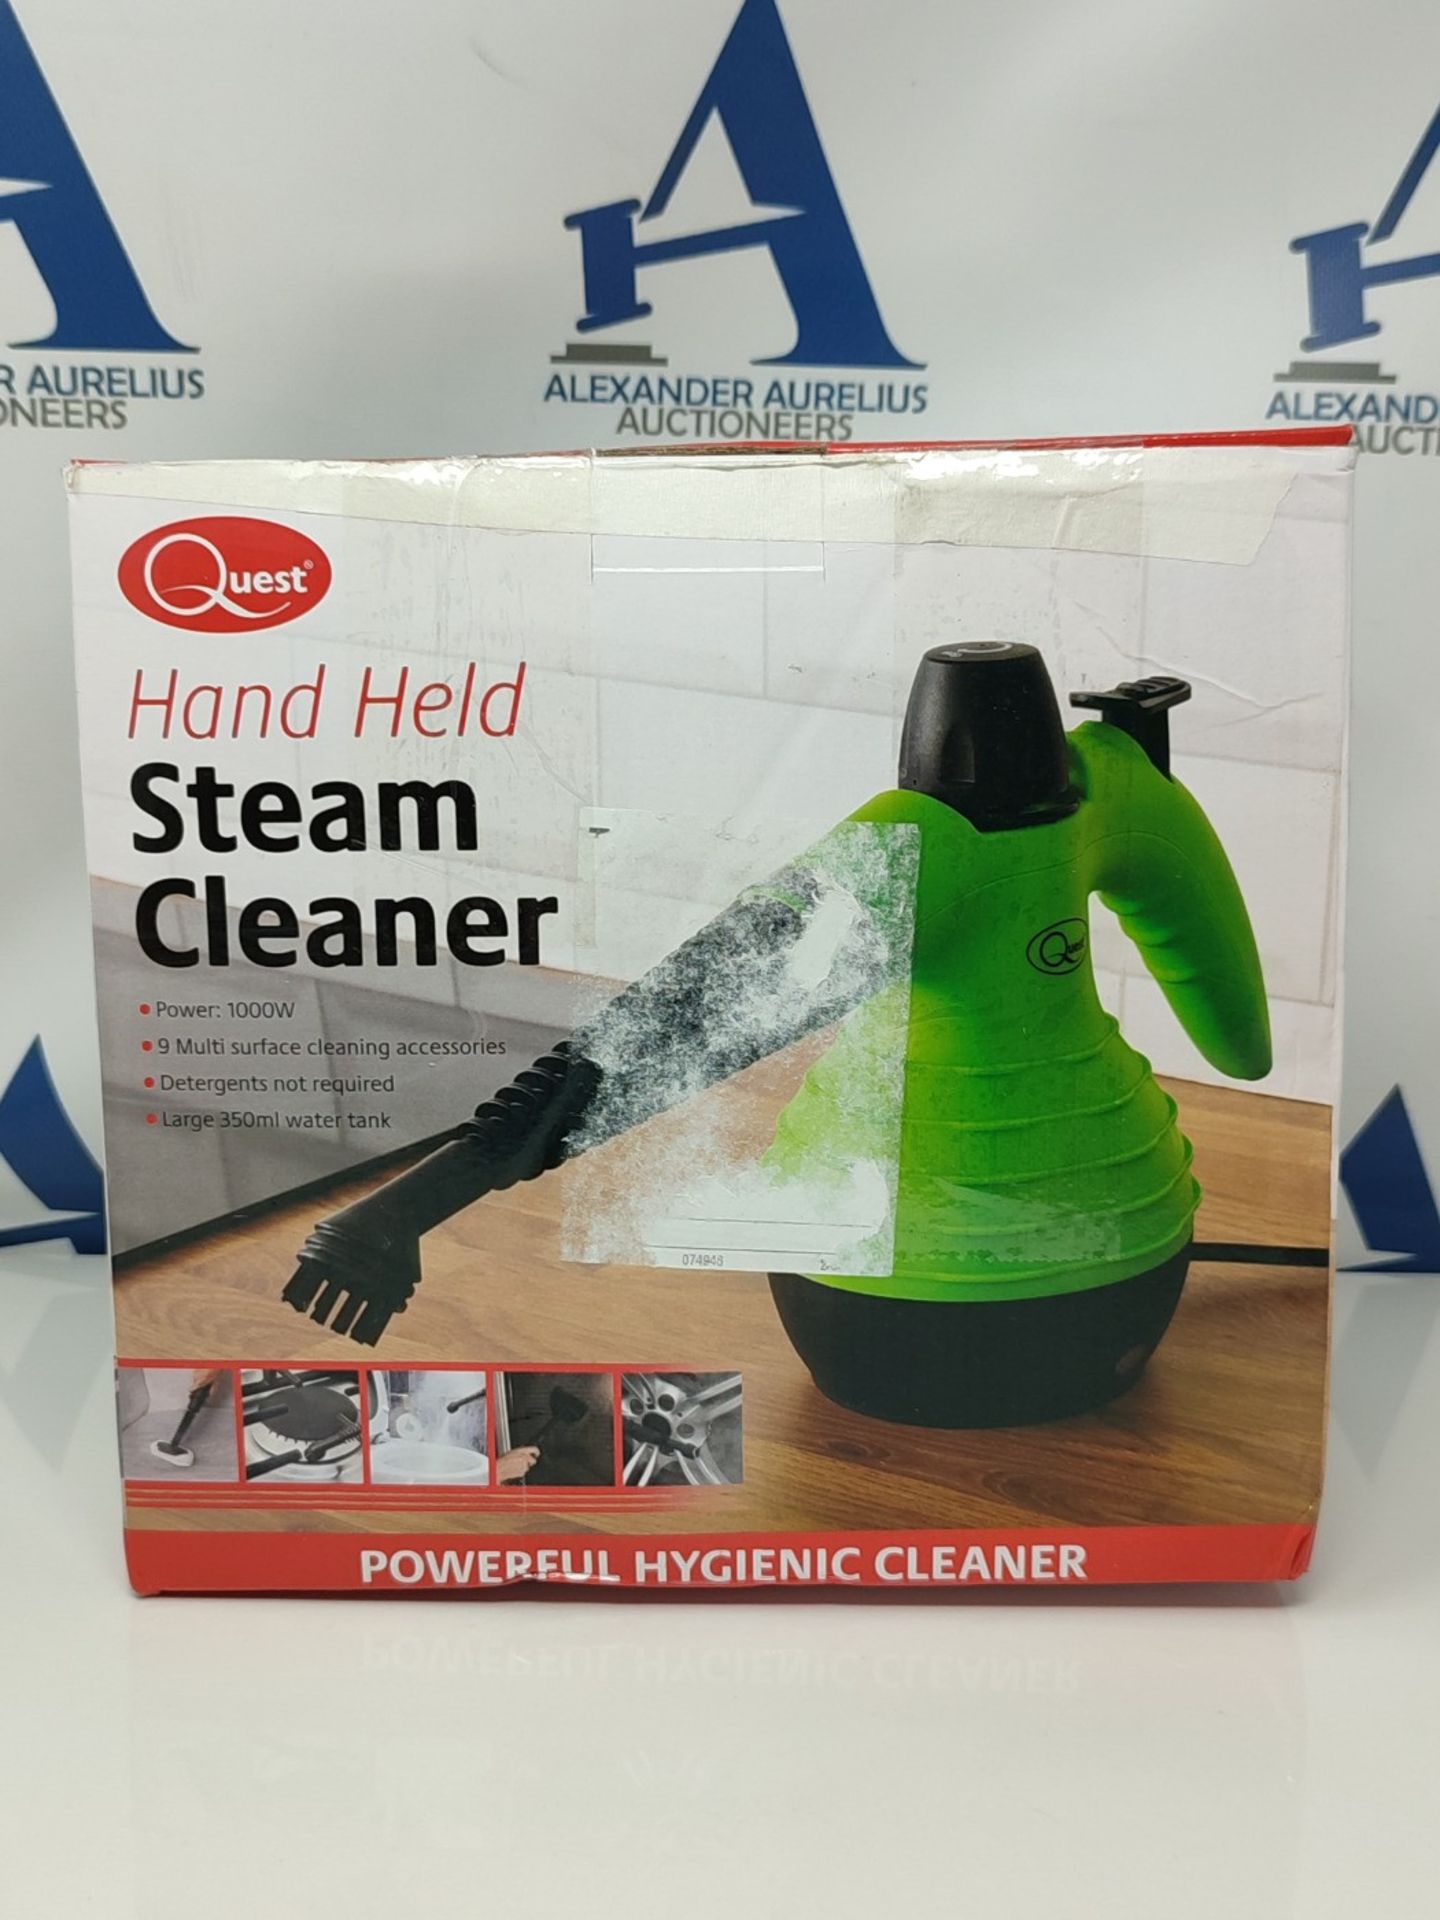 Quest Handheld Steam Cleaners / 2 Colours / Multi-Purpose / Portable / 1,000W / 0.35L - Image 3 of 3